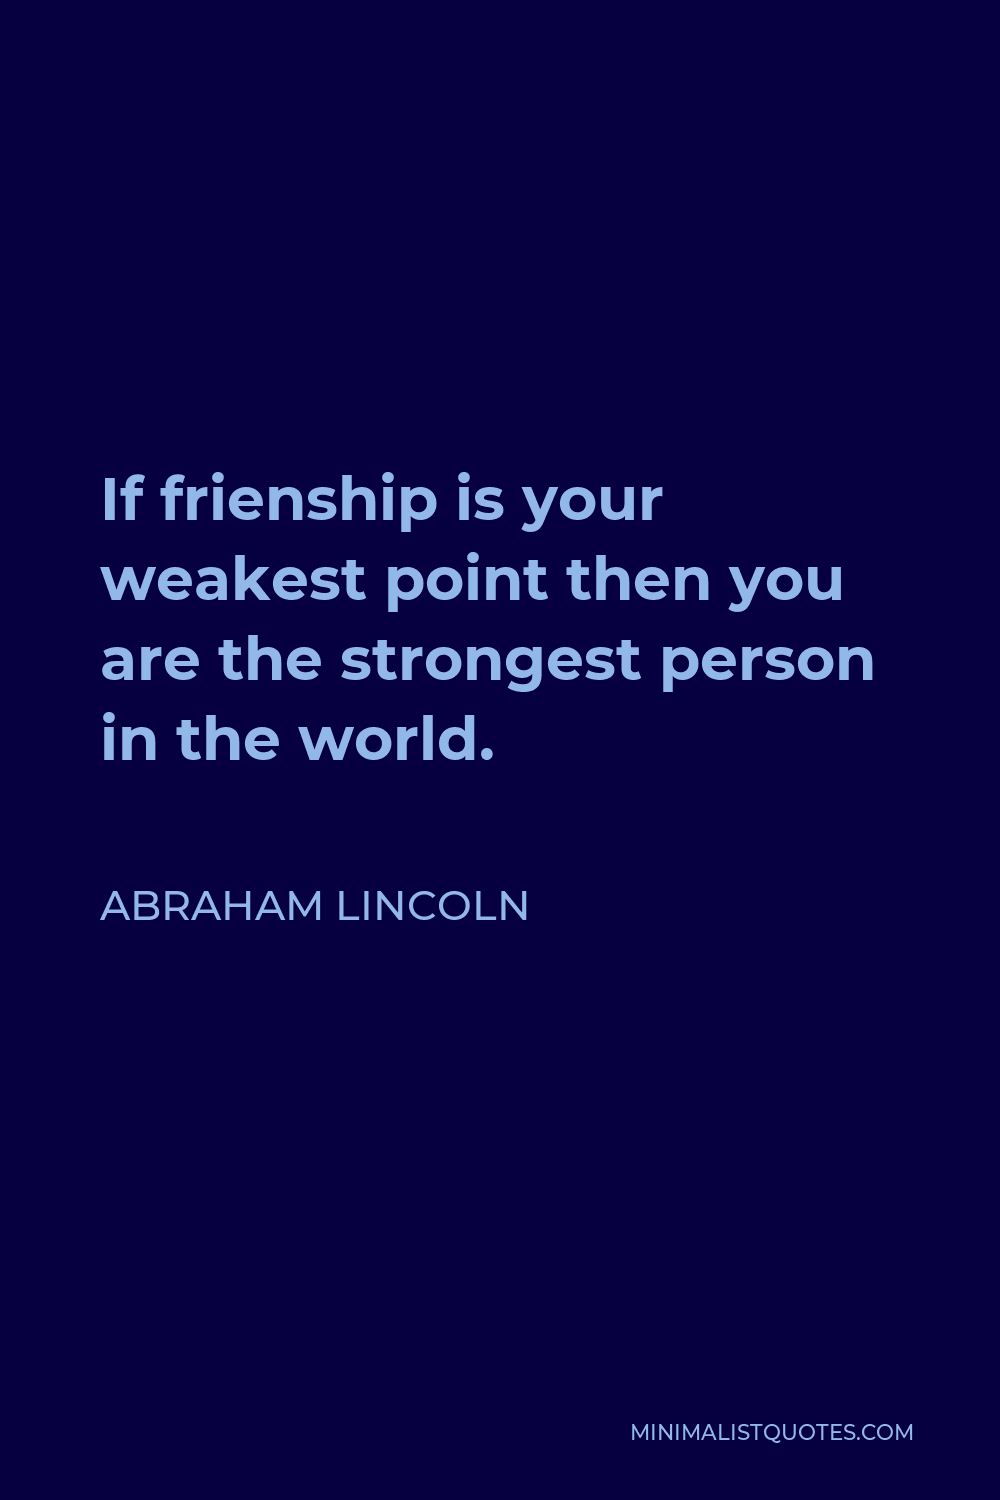 Abraham Lincoln Quote - If frienship is your weakest point then you are the strongest person in the world.